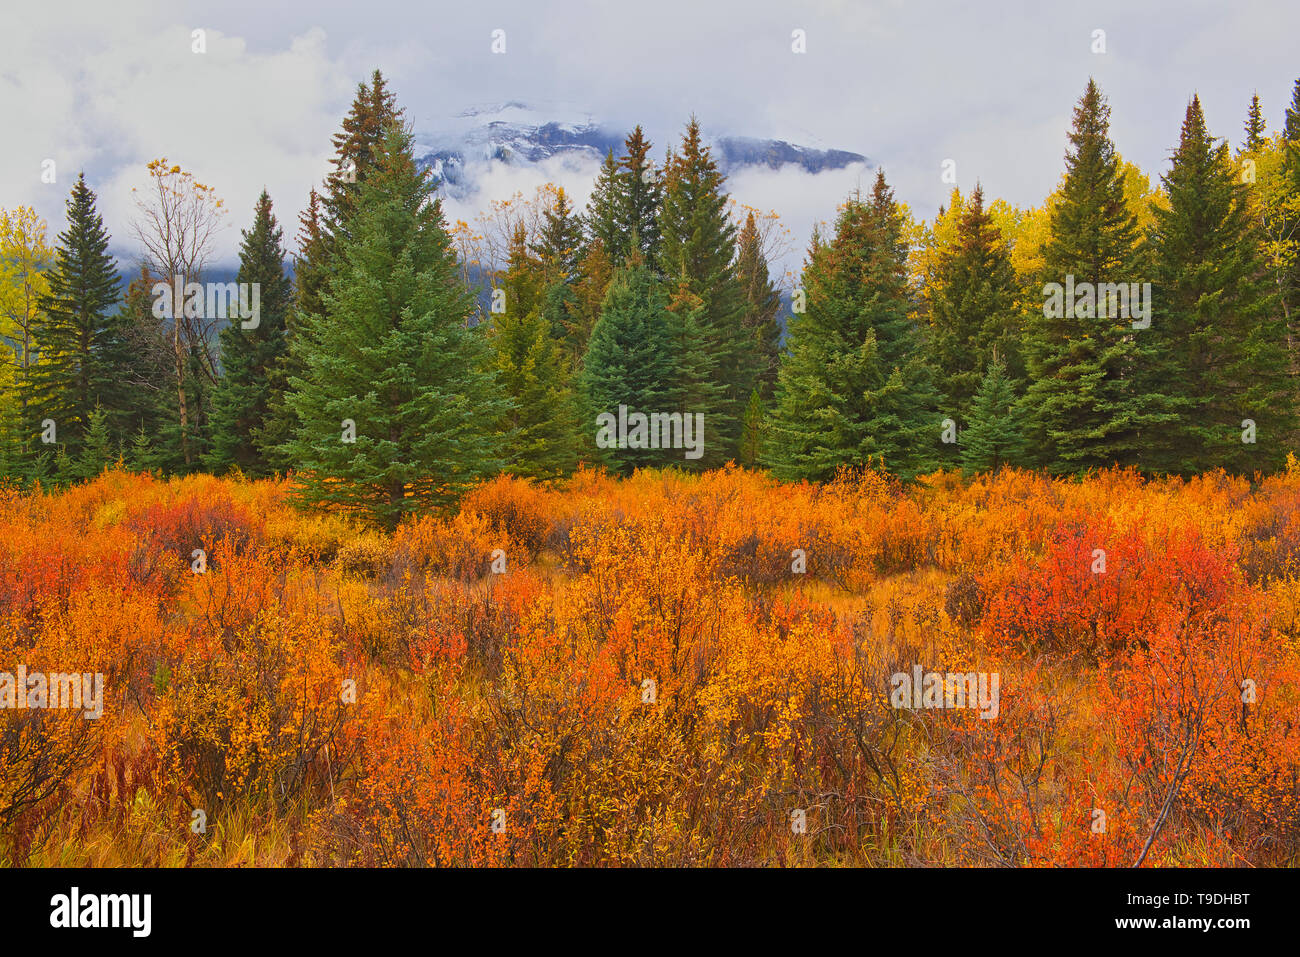 Autumn colour at Hillside Meadows in the Bow Valley Banff National Park Alberta Canada Stock Photo